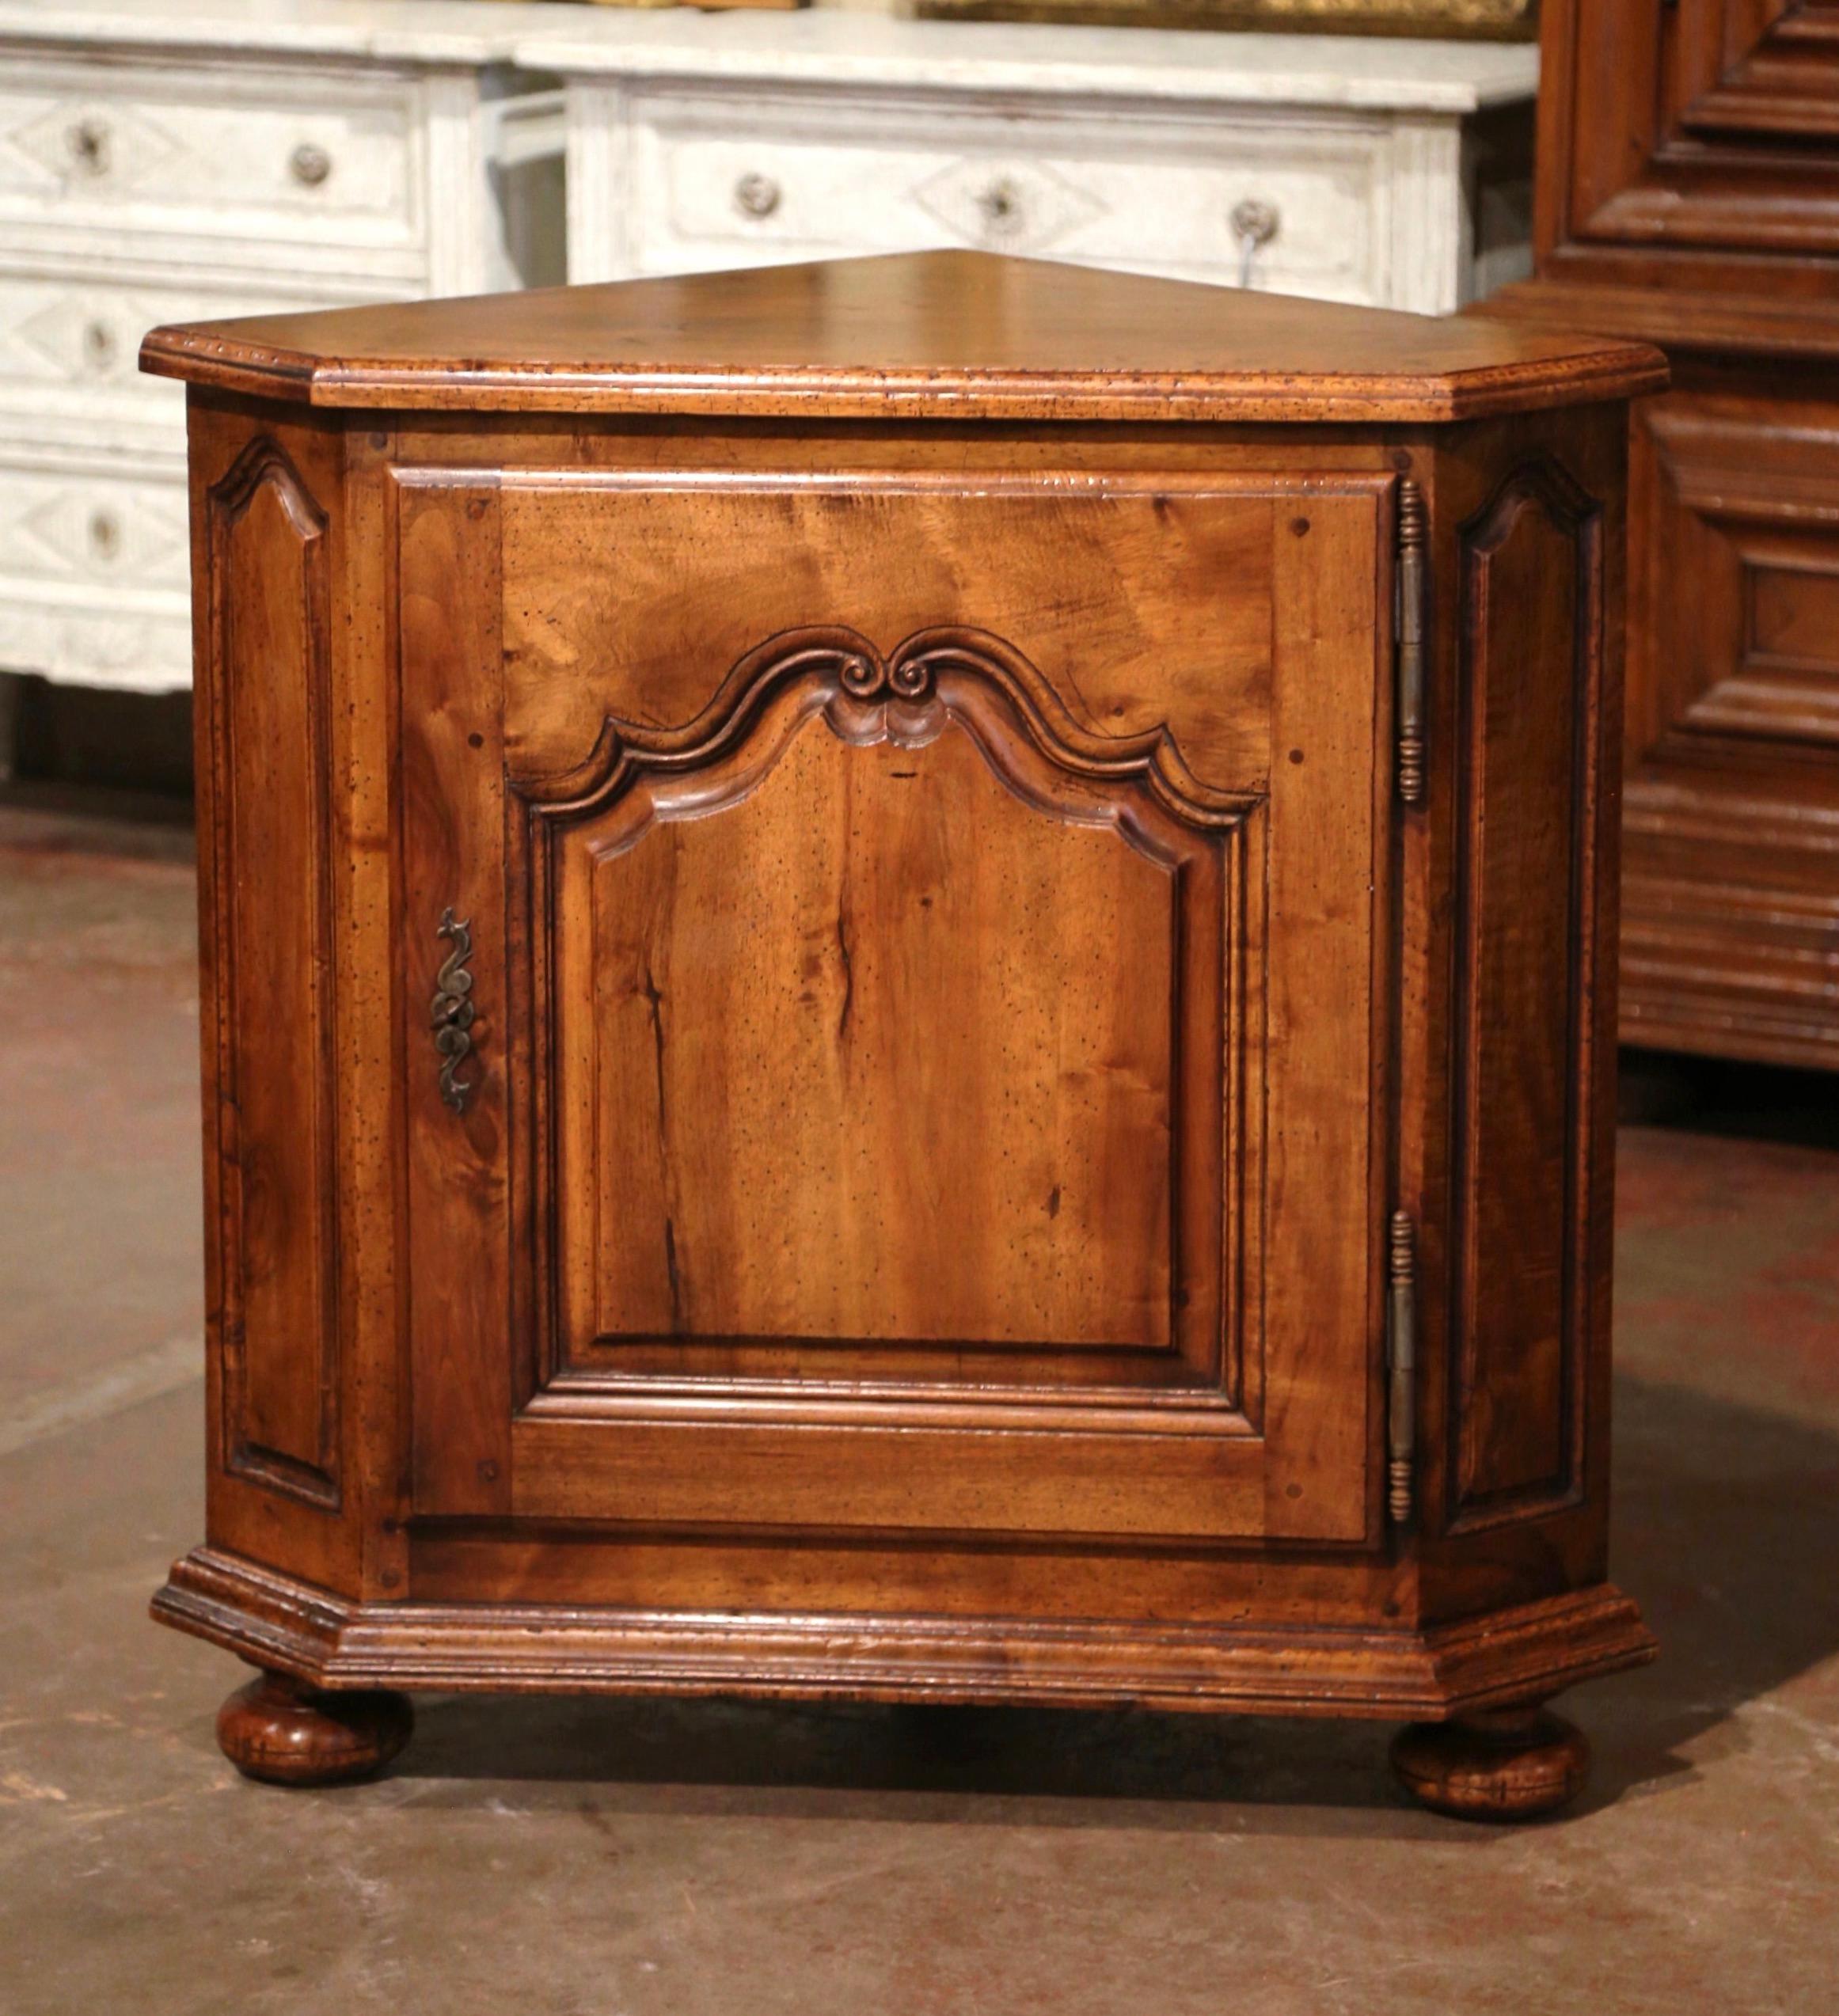 19th Century French Louis XIV Carved Walnut Encoignure Corner Cabinet In Excellent Condition For Sale In Dallas, TX